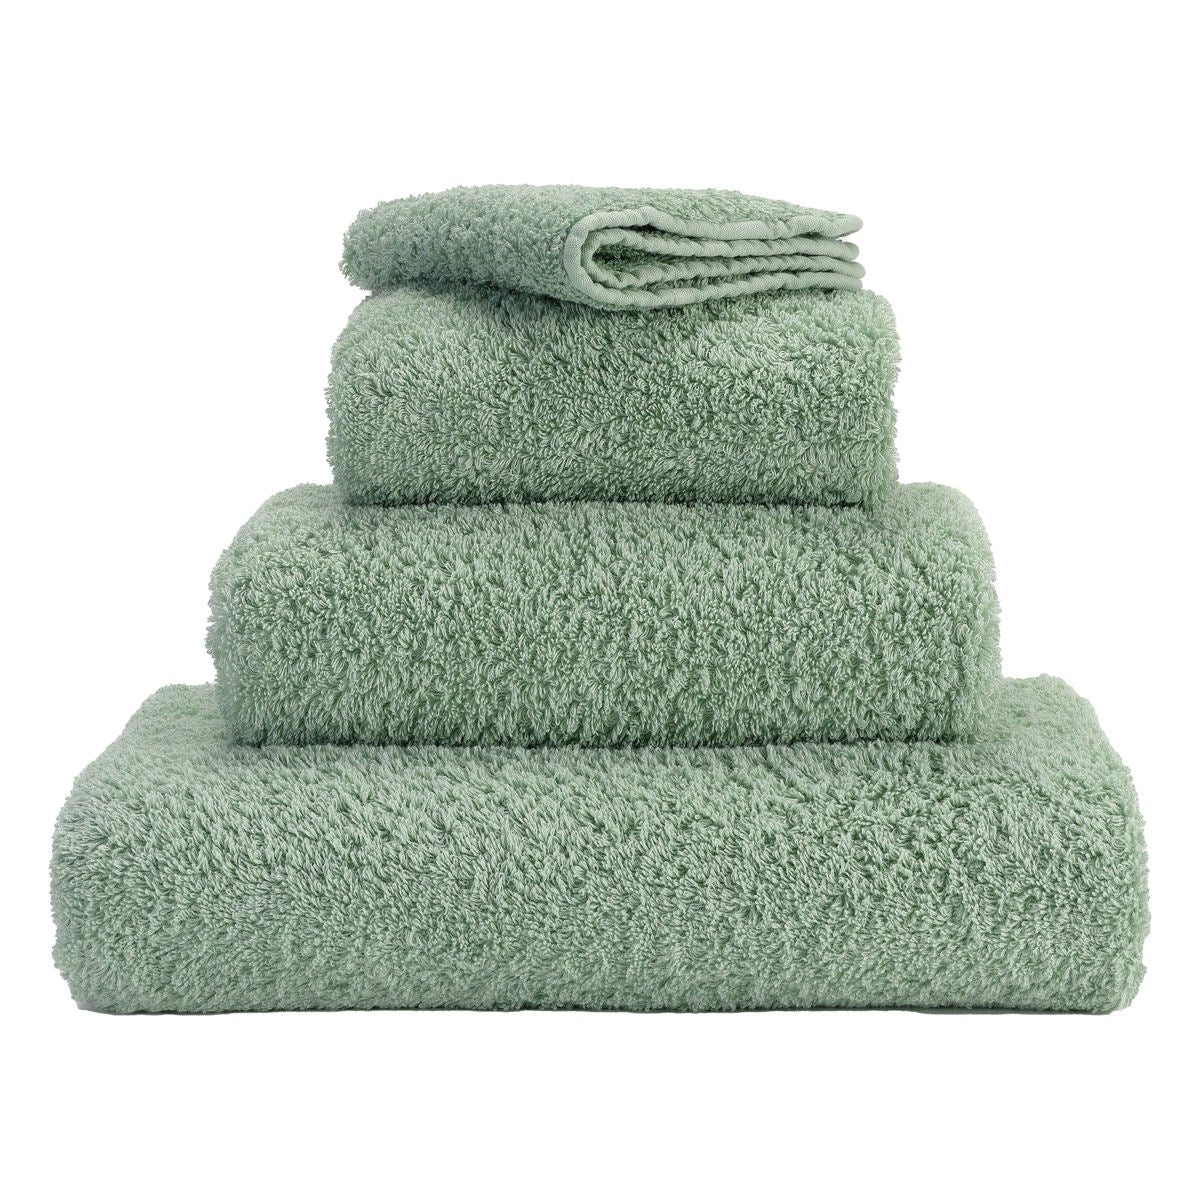 Softest and Most Absorbent Light Blue Super Pile Egyptian Cotton Towel